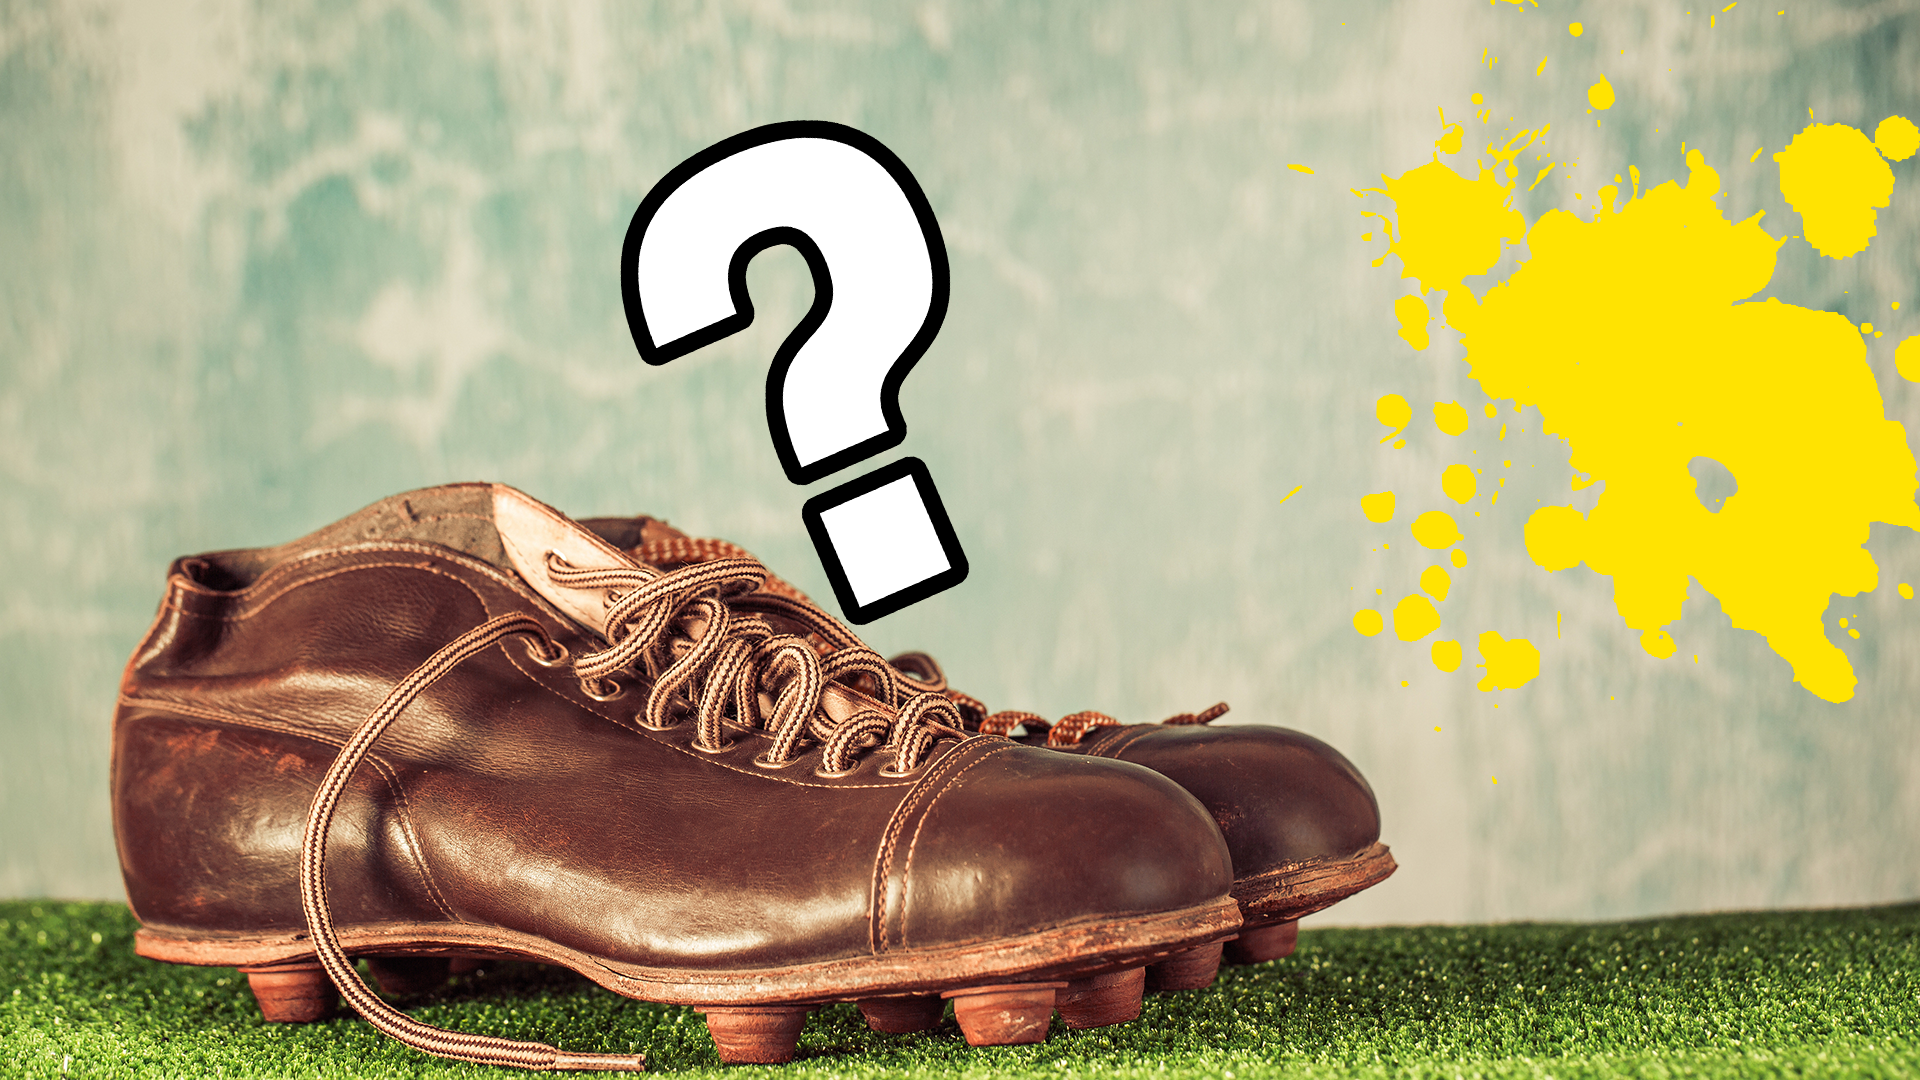 Old football boots with question mark and splat